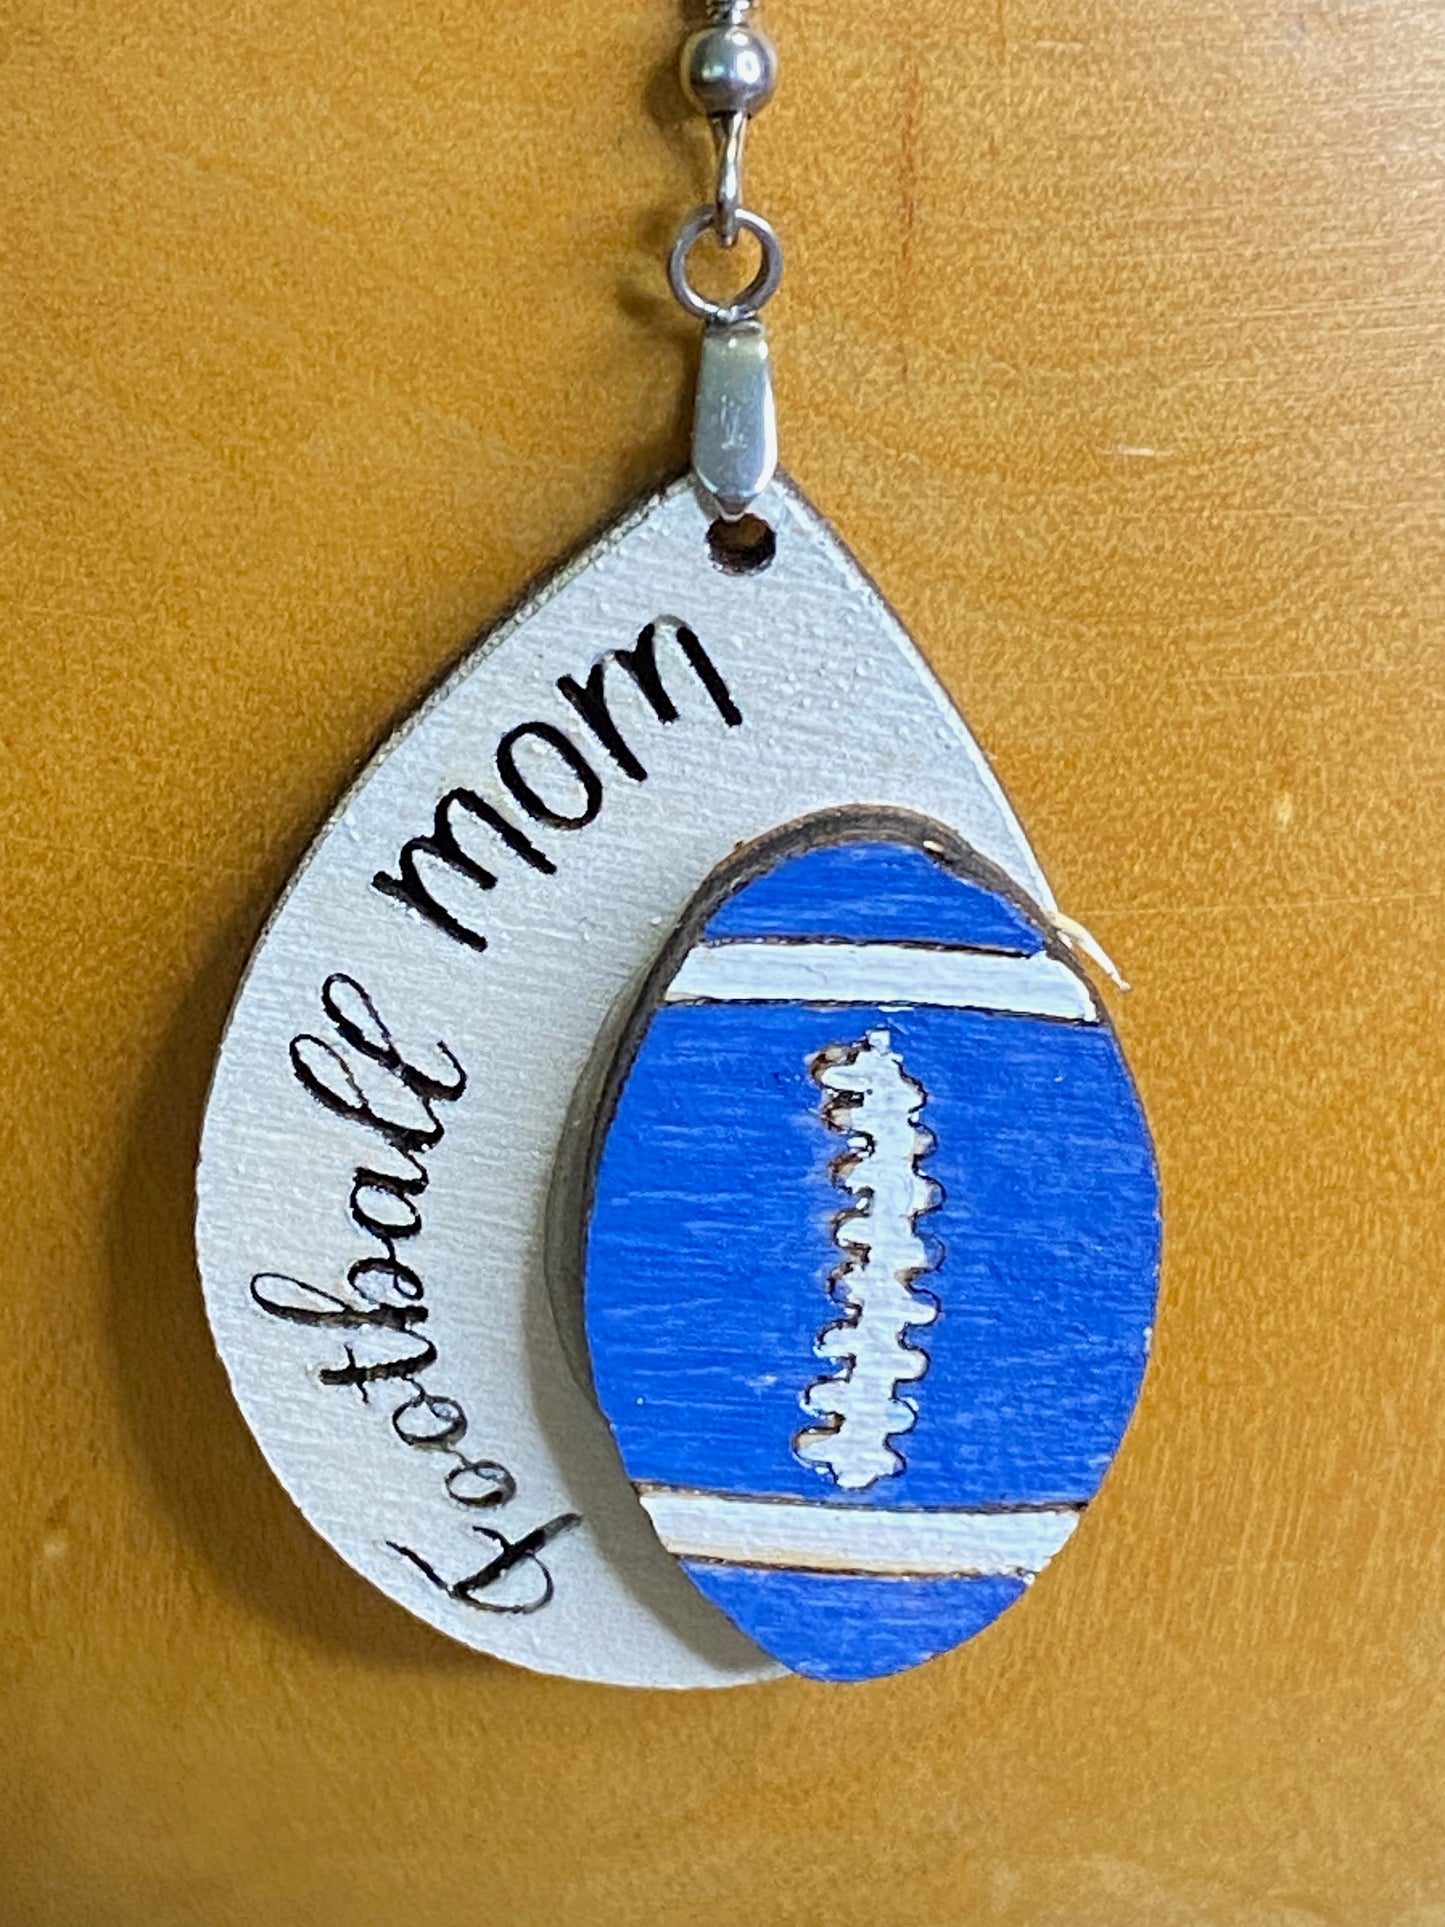 Football Mom - Hand Painted Wooden Earrings with 3D Football - School Color Football available